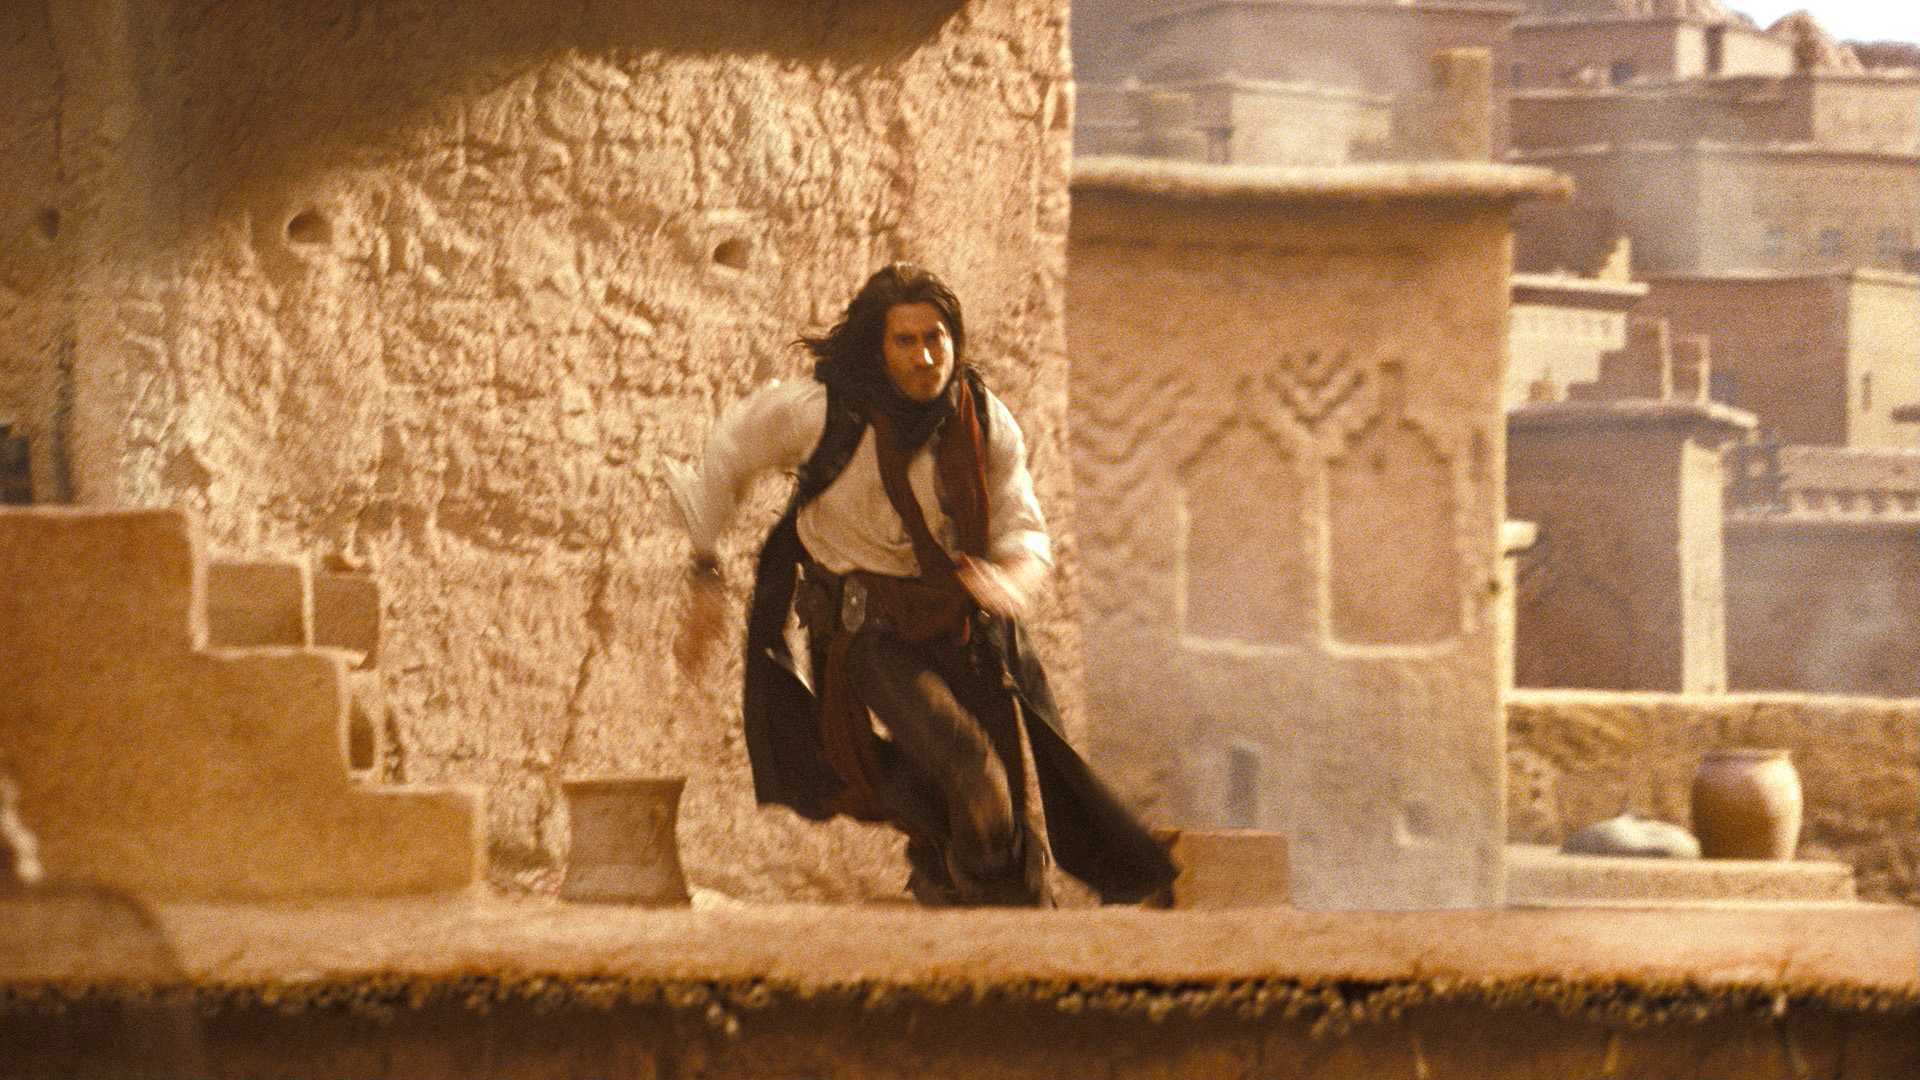 Prince of Persia The Sands of Time 波斯王子：时之刃34 - 1920x1080